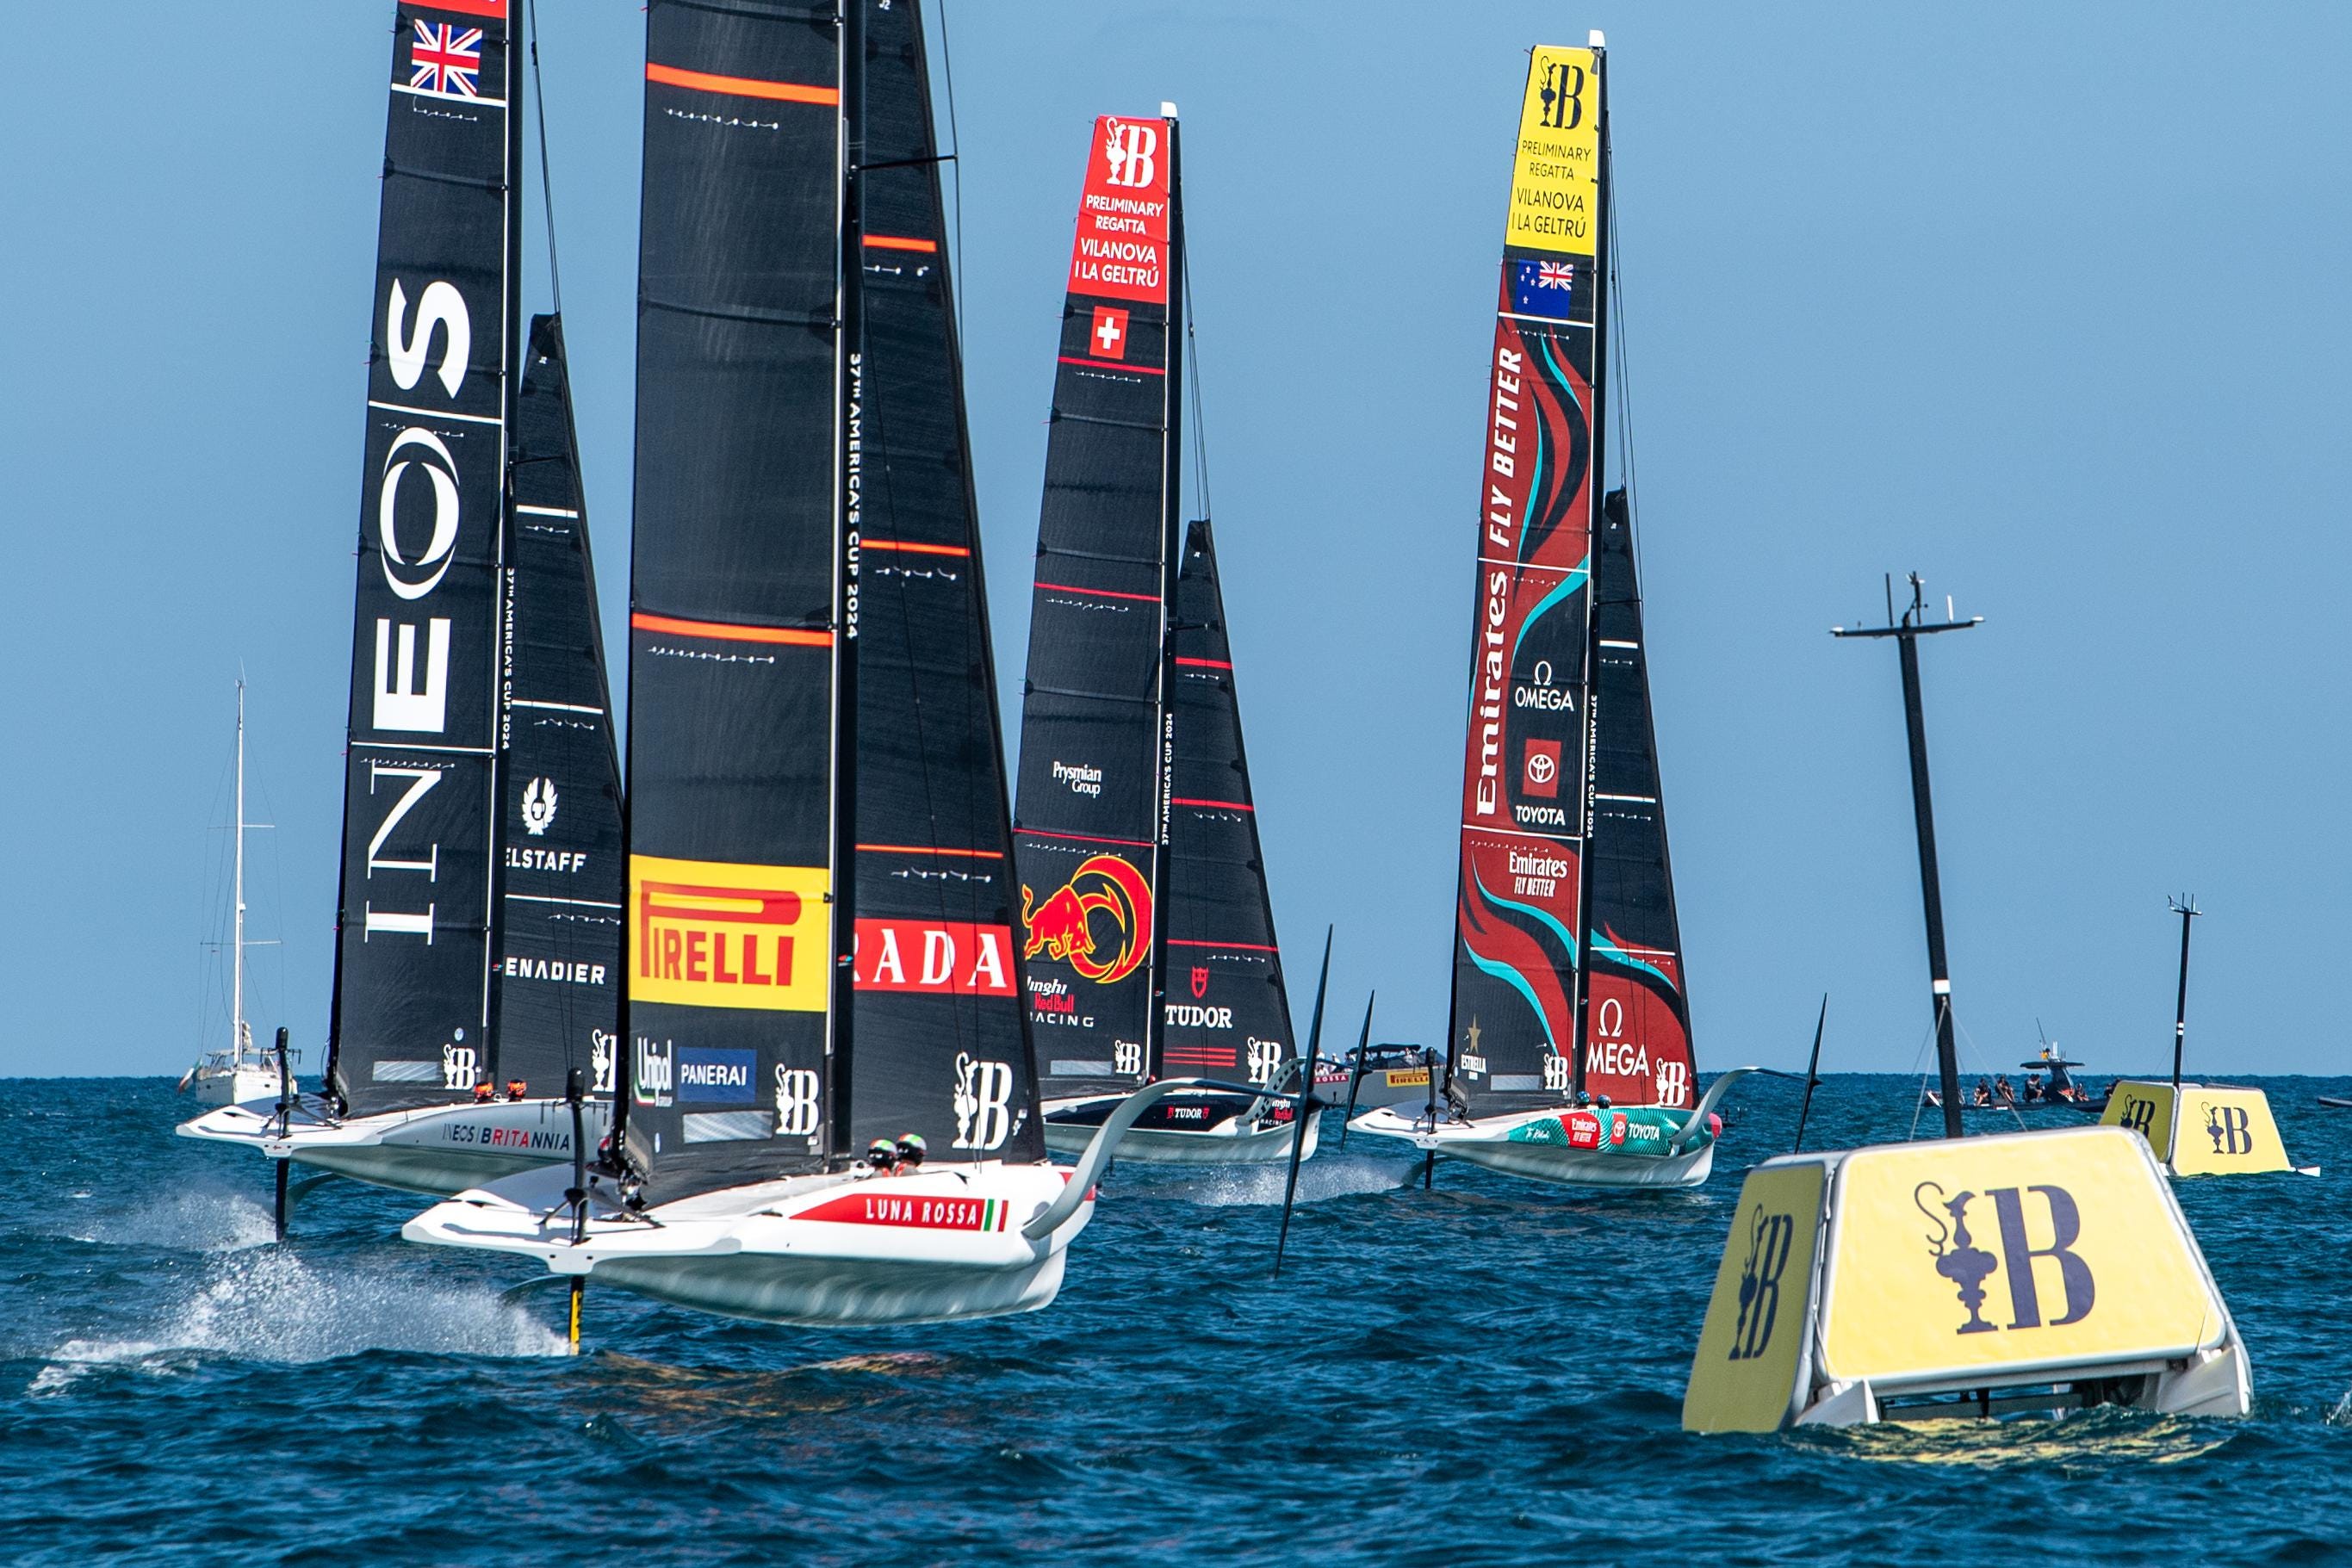 America's Cup is back: Team NZ to race challengers for first time